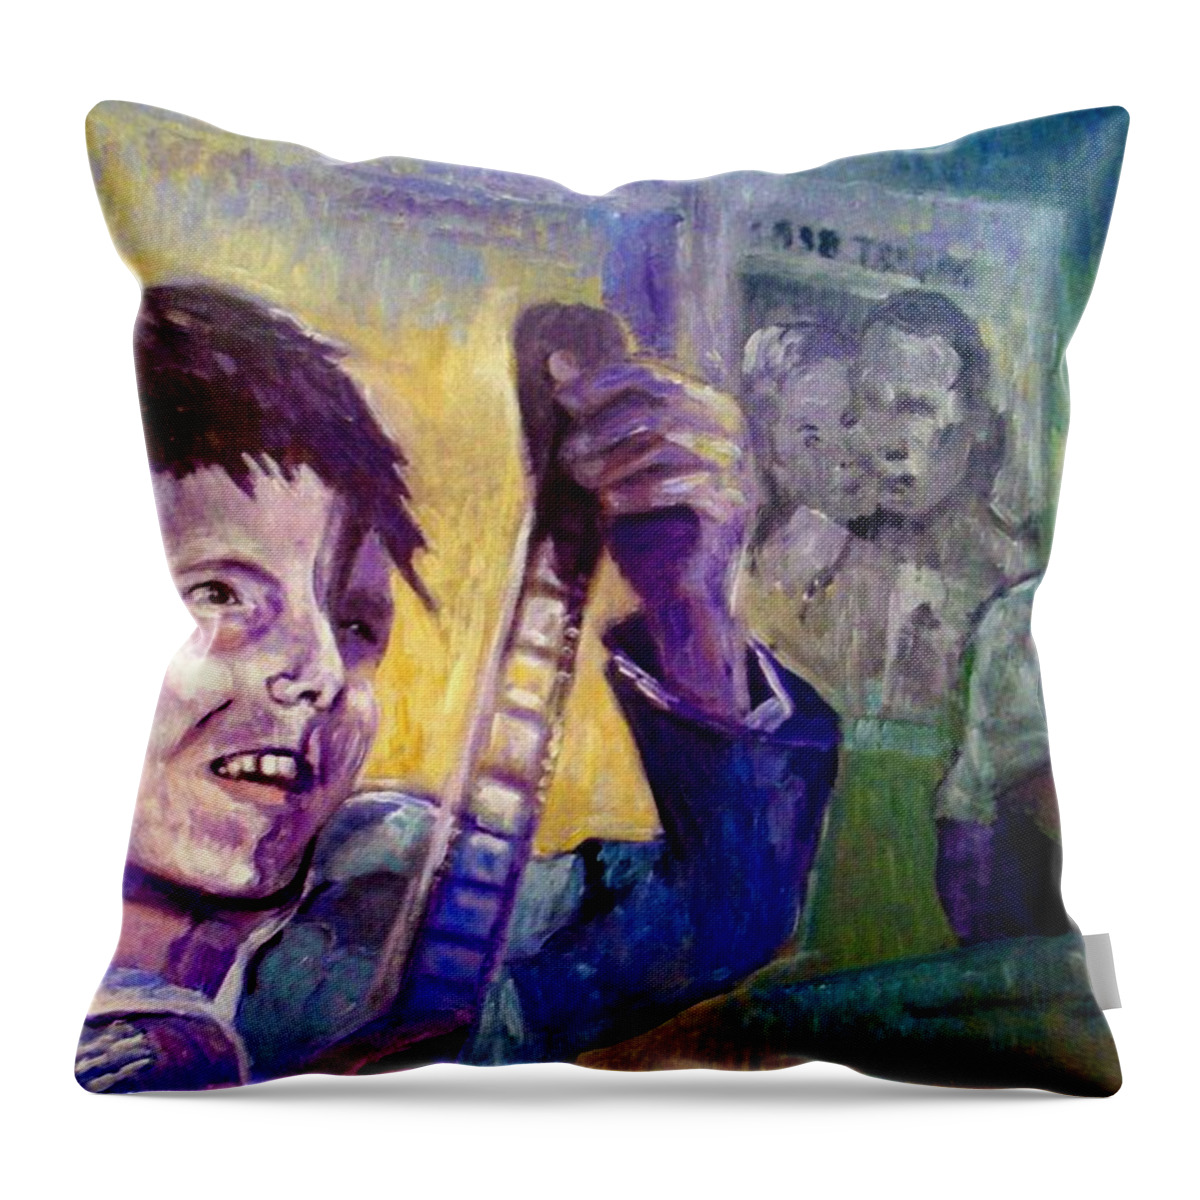 Movie Throw Pillow featuring the painting Cinema Paradiso by Paul Weerasekera